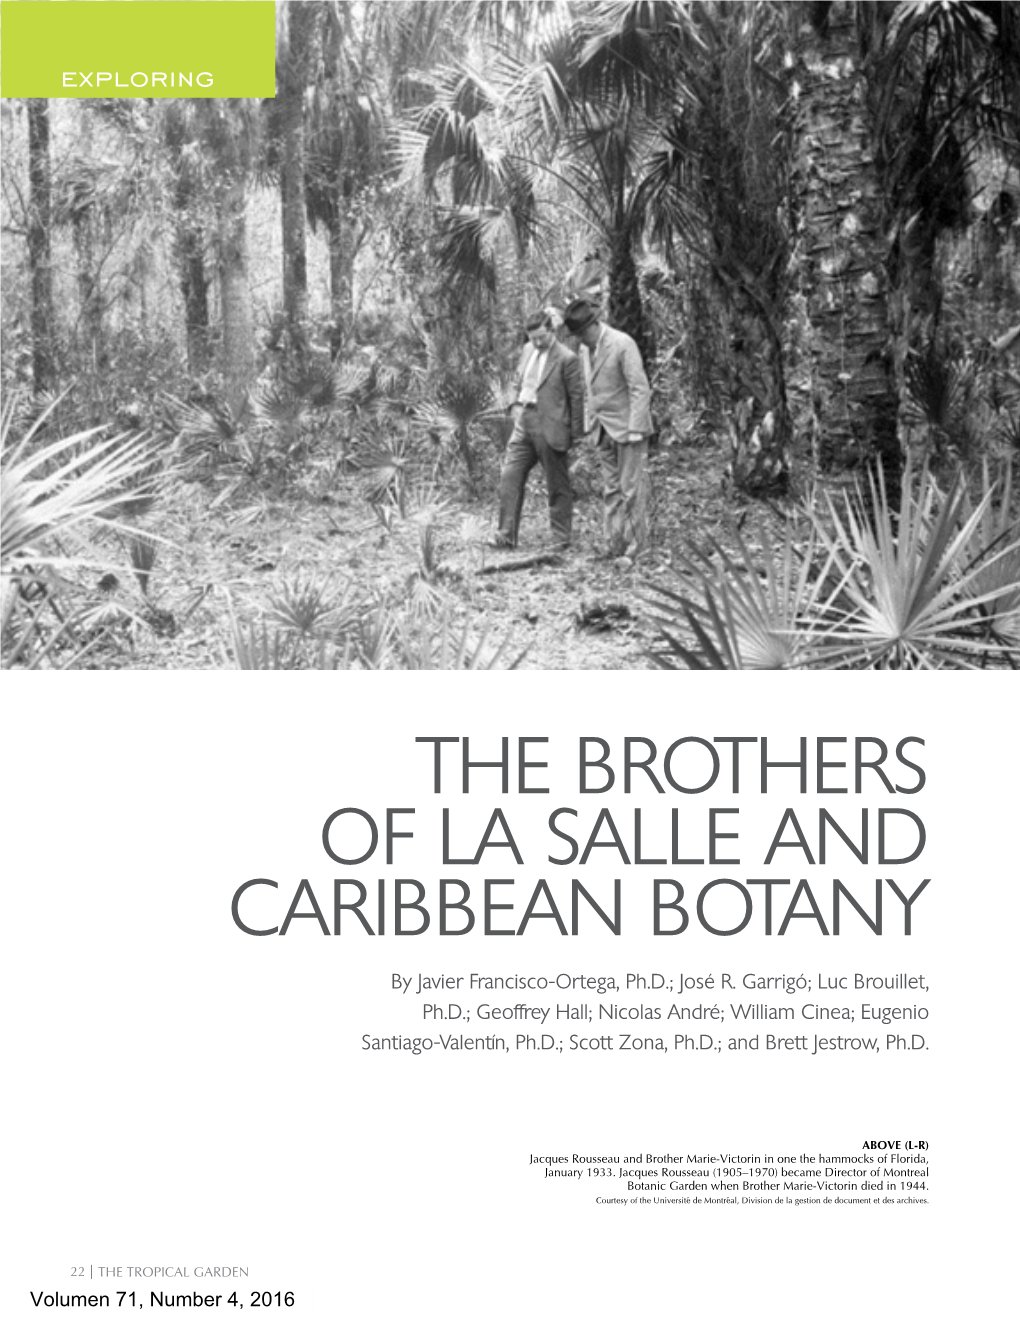 The Brothers of La Salle and Caribbean Botany by Javier Francisco-Ortega, Ph.D.; José R